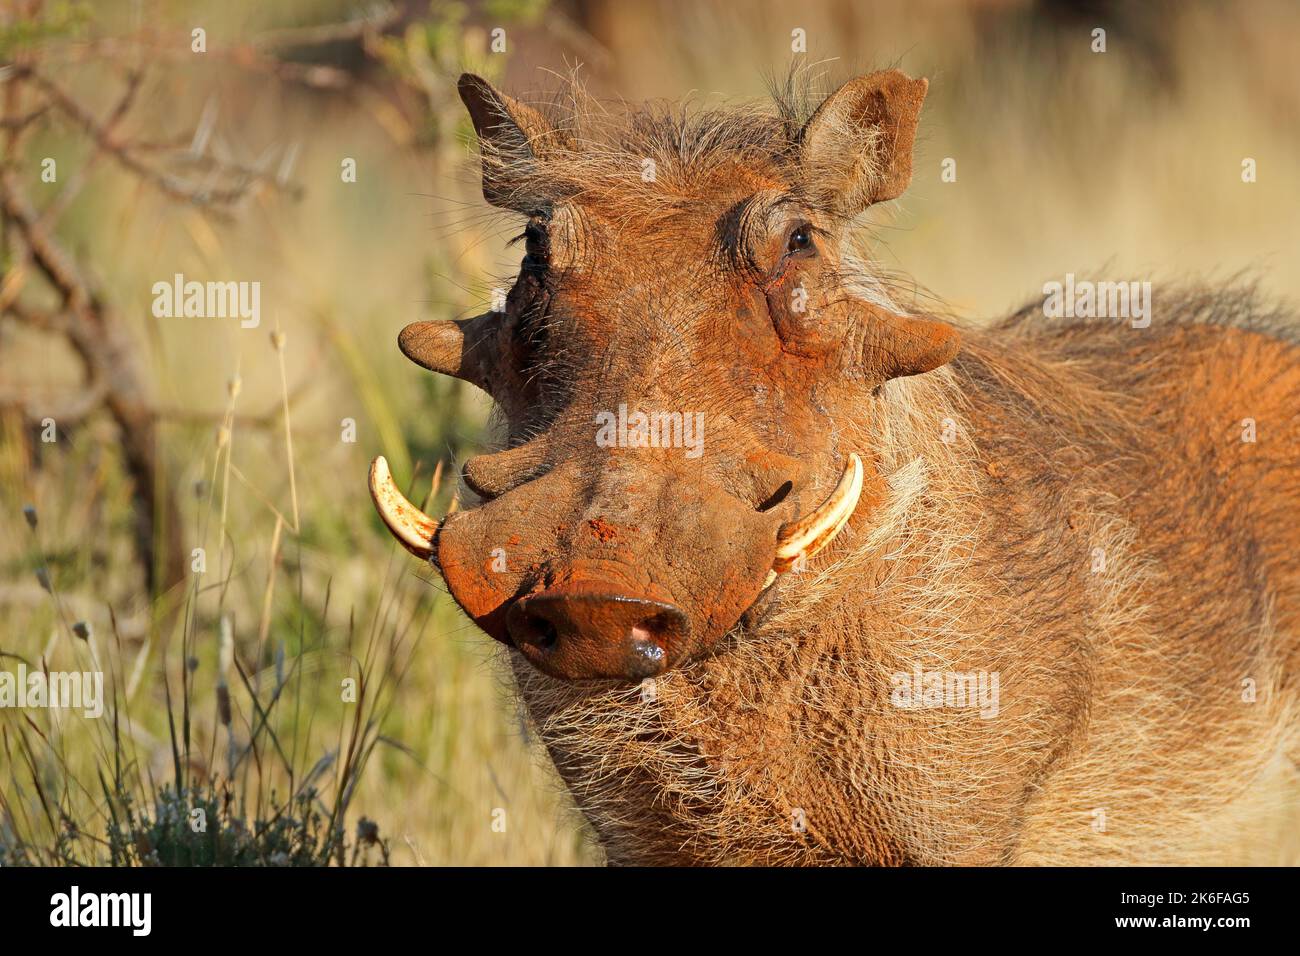 Portrait of a warthog (Phacochoerus africanus) in natural habitat, South Africa Stock Photo